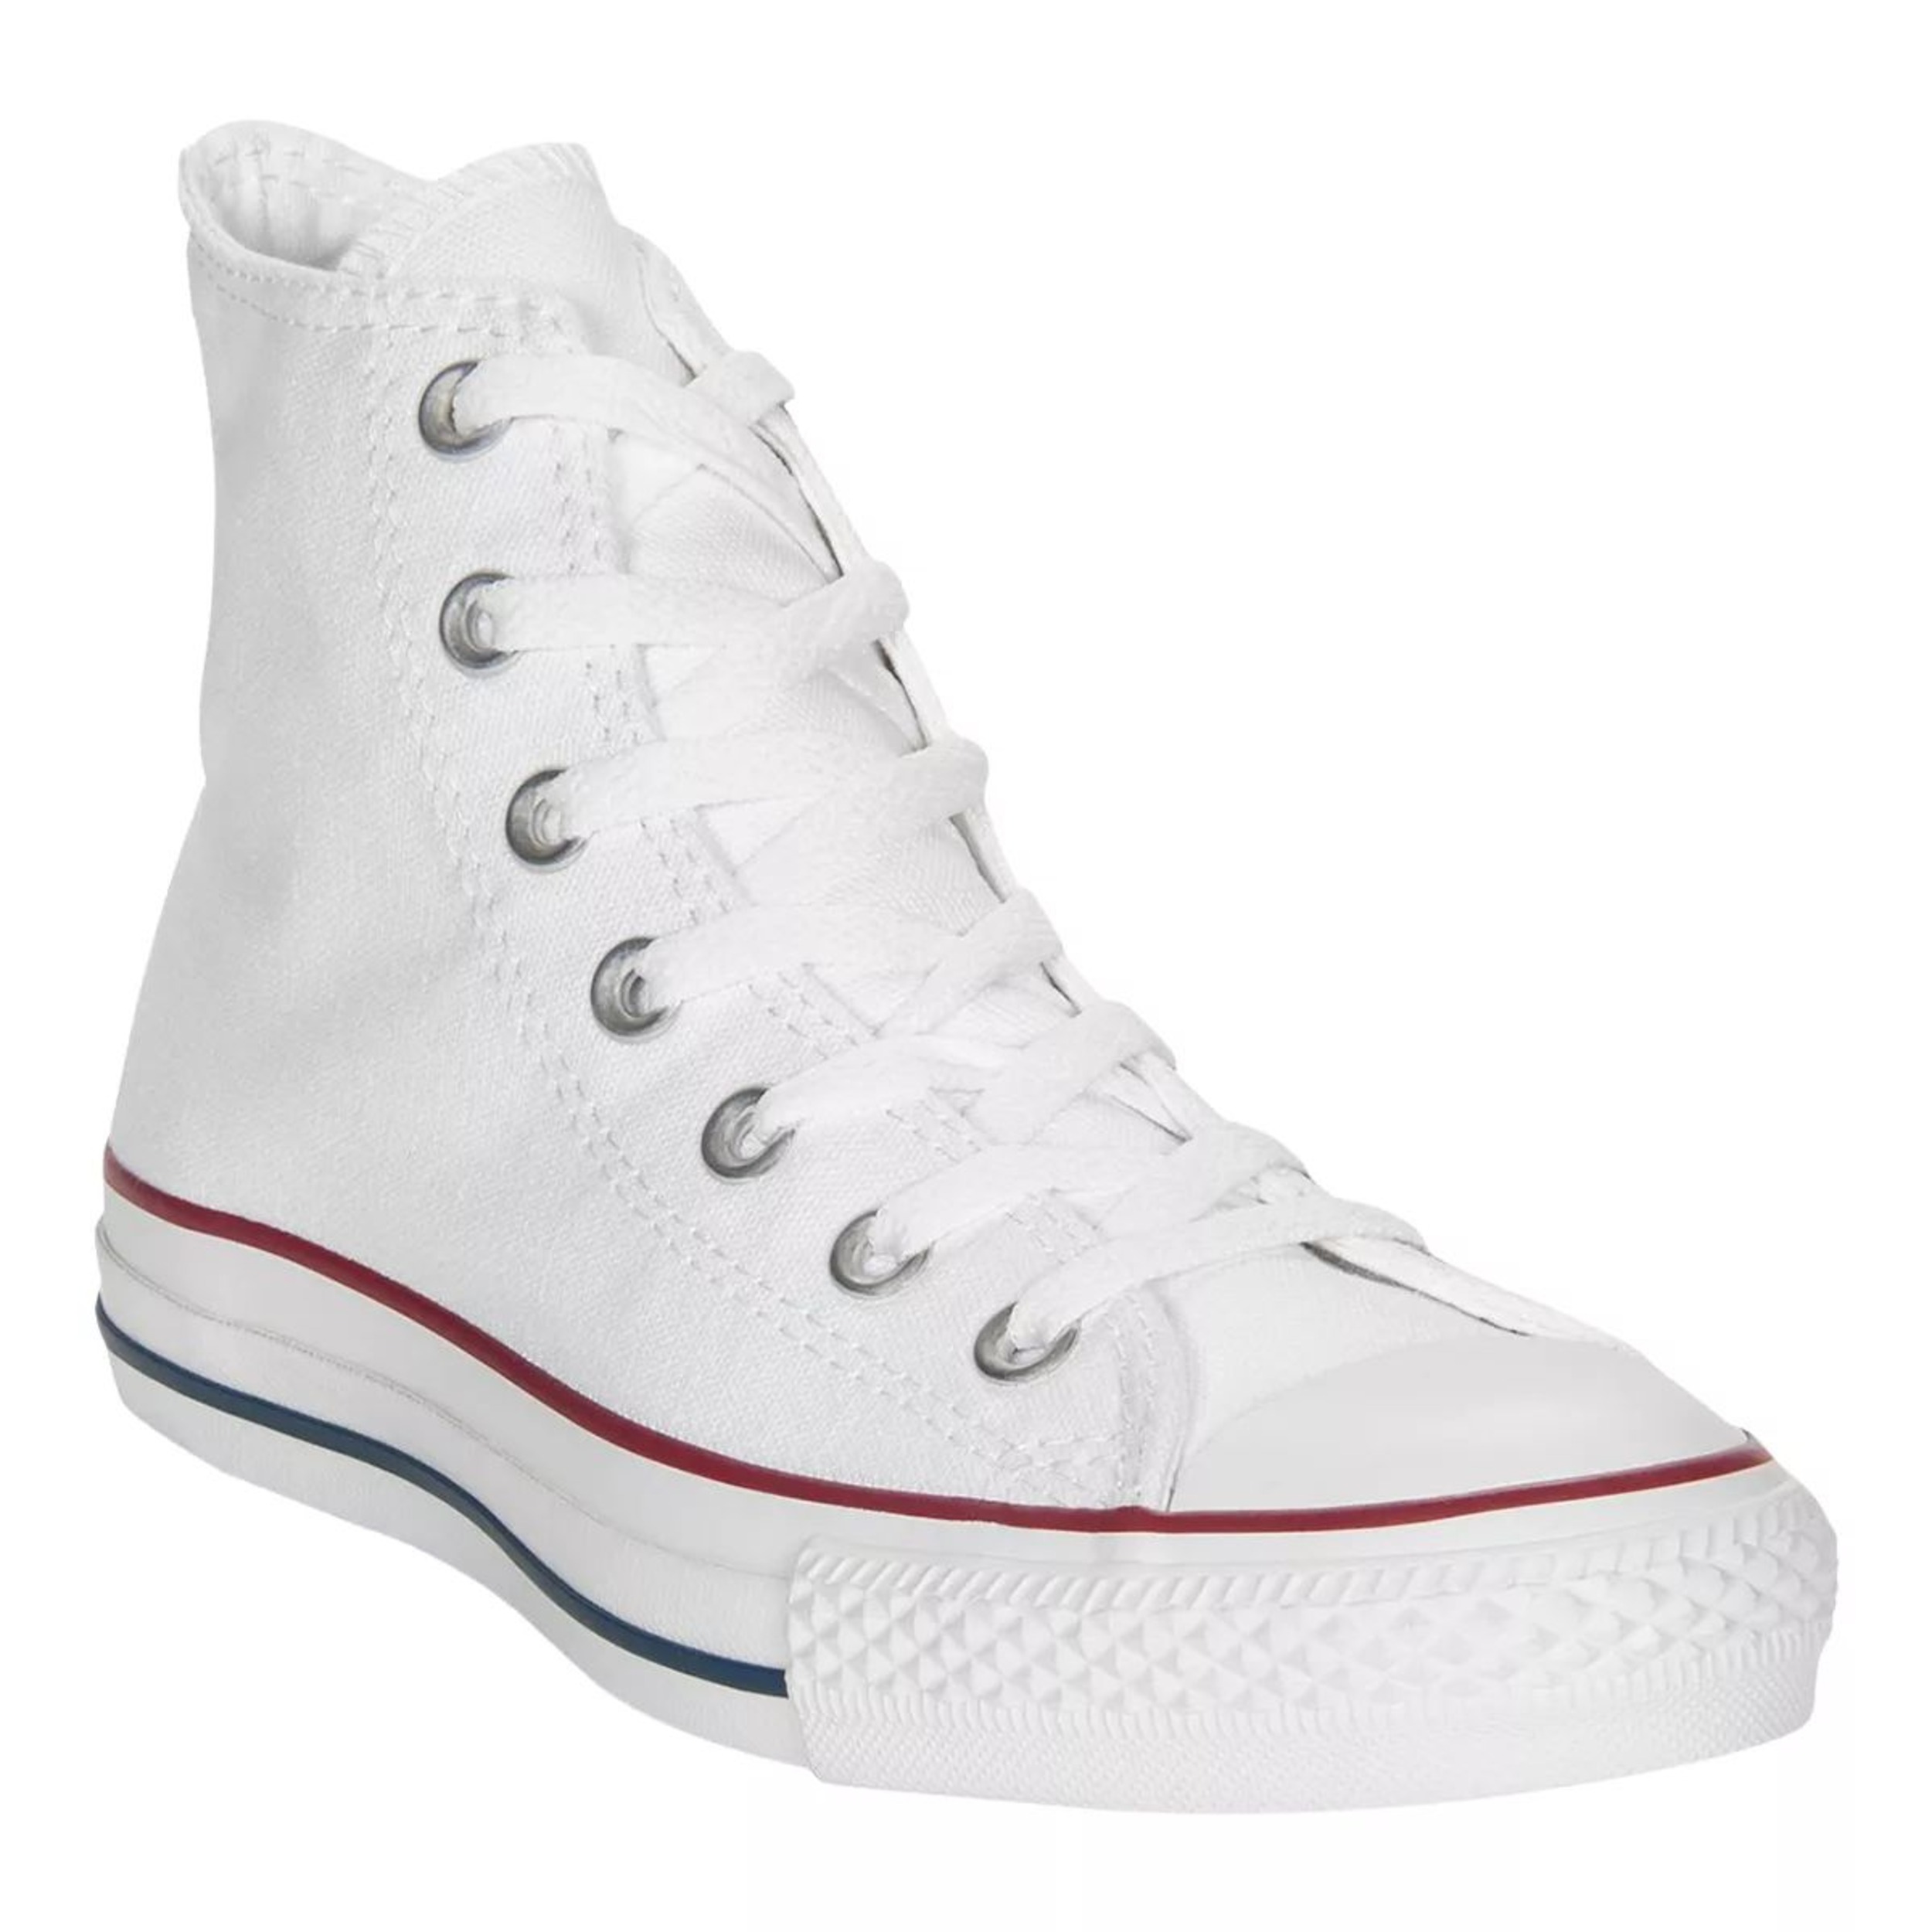 Converse Women's Chuck Taylor All Star Shoes, Sneakers, High Top ...